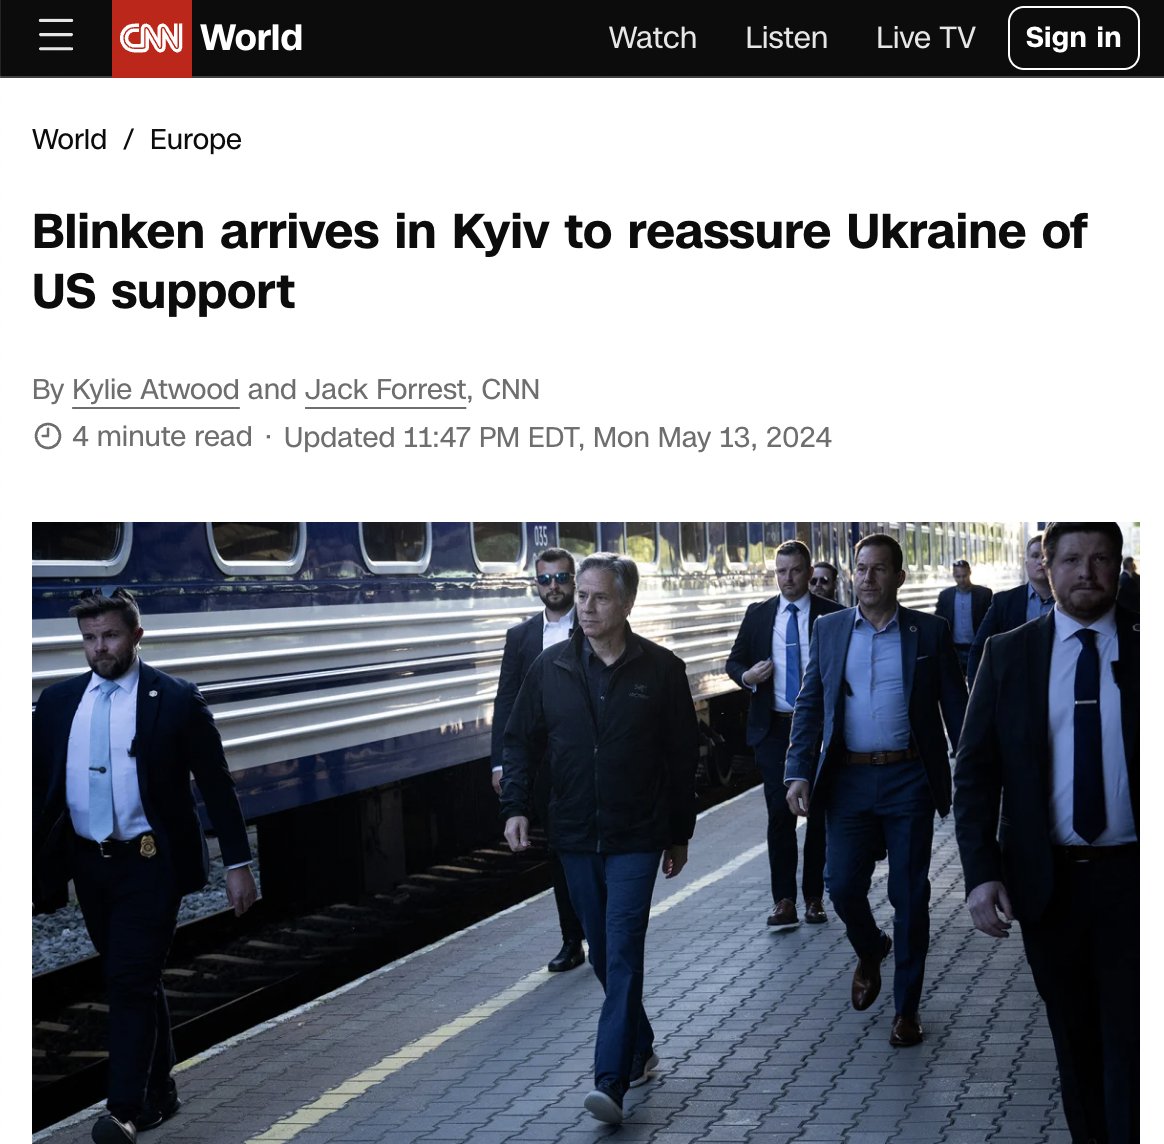 Things are going really bad in Ukraine. Blinken is in Kiev to try and slow down the slide. Publically, in his speech later today, Blinken will say: - We are with you for as long as it takes. - Putin lost because he failed to capture Kiev in 3 days. - Putin is afraid of